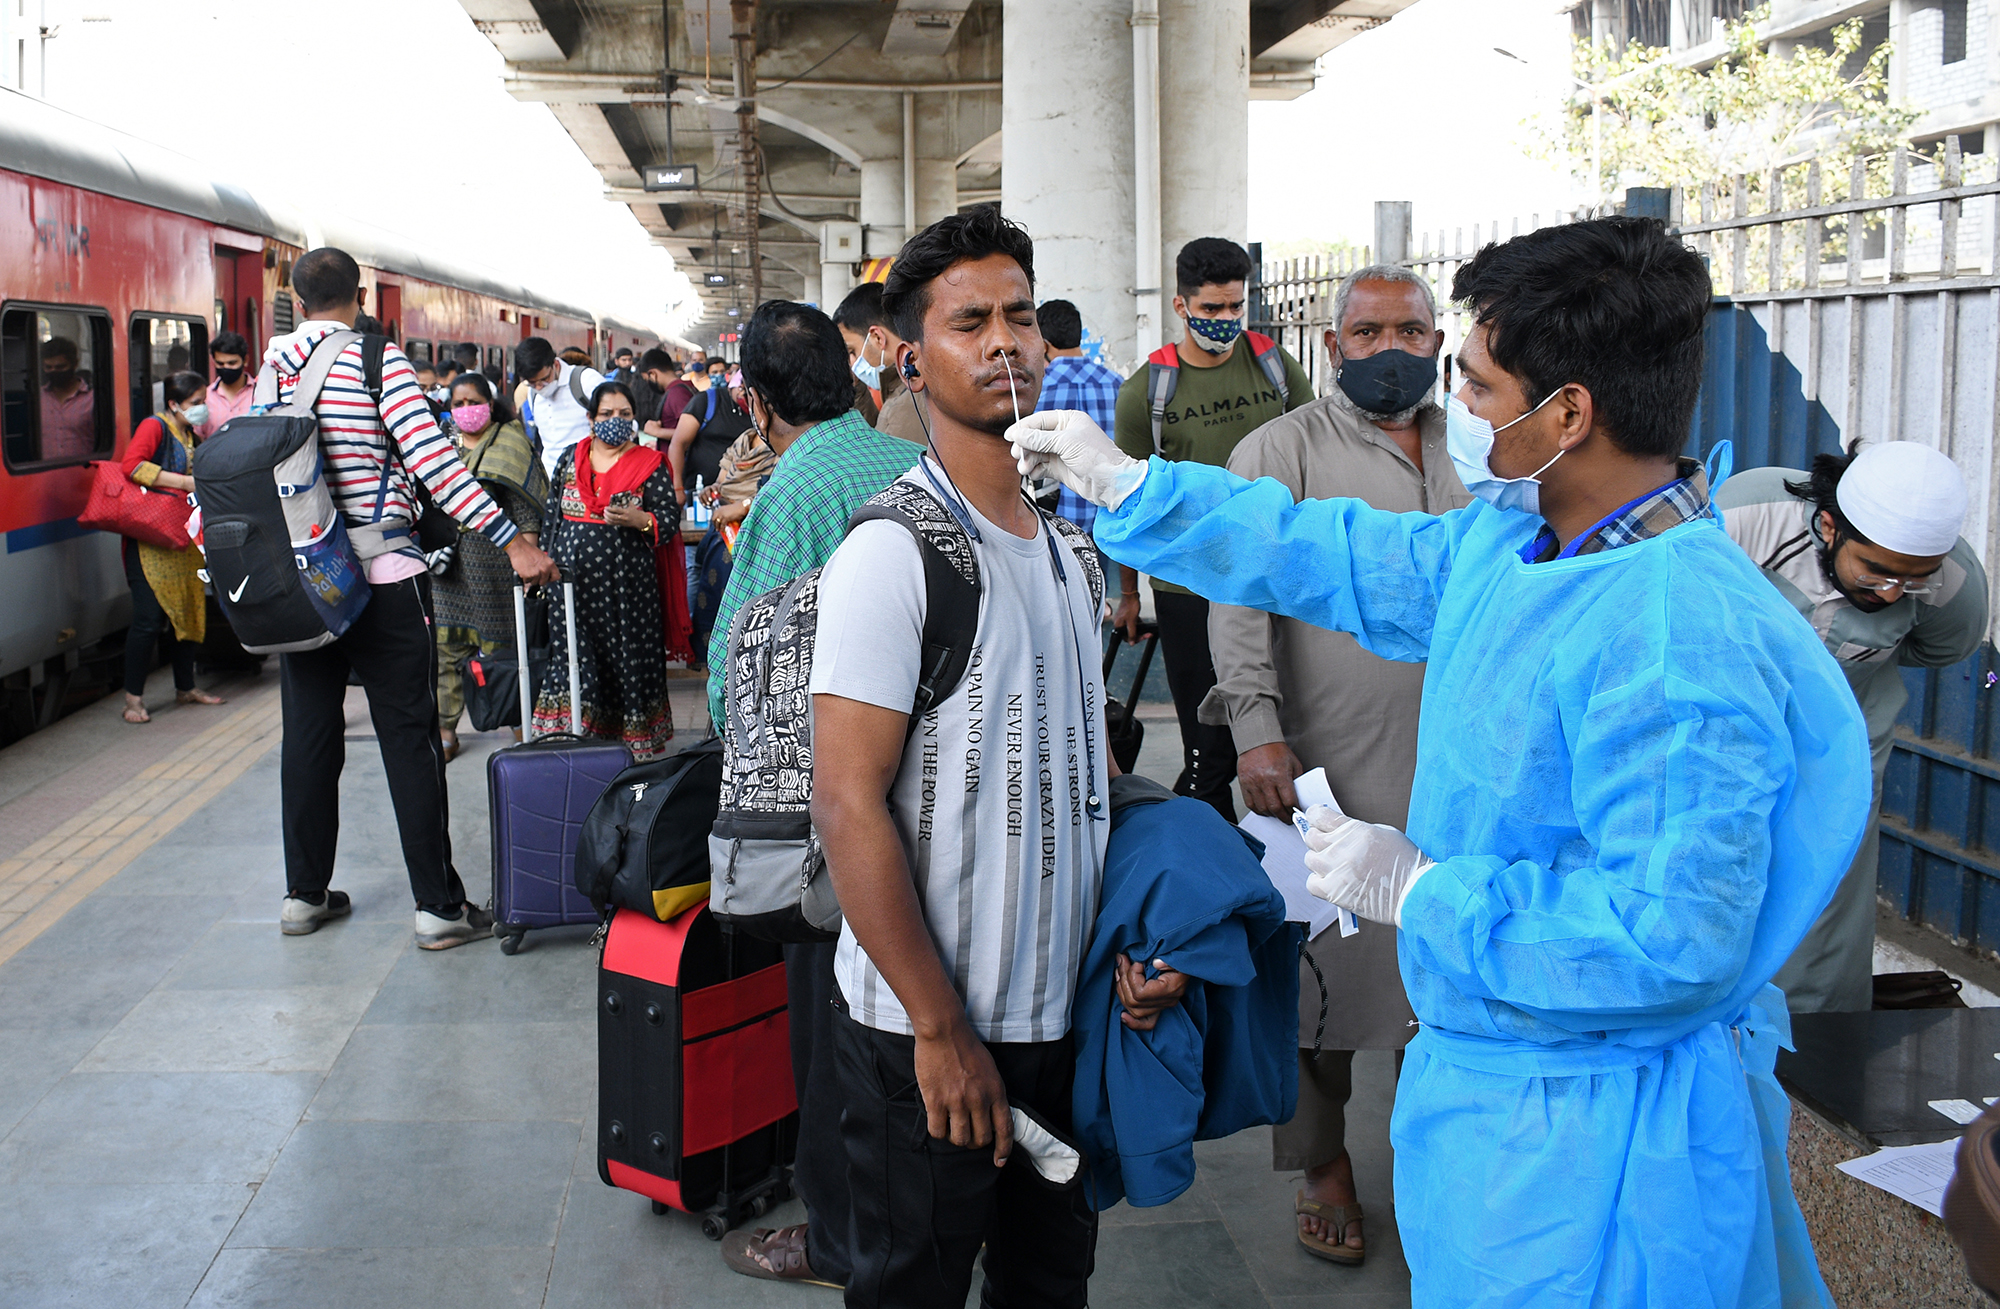 MUMBAI, INDIA - 2021/12/31: A healthcare worker collects a nasal swab sample from a man at Dadar railway station in Mumbai, India on 31 December 2021. Due to rise in Omicron cases in the city, passengers arriving from outstation who are not fully vaccinated or carrying a negative RT PCR report along with them have to undergo nasal swab testing at the railway station before they are allowed to proceed to their respective destination. 